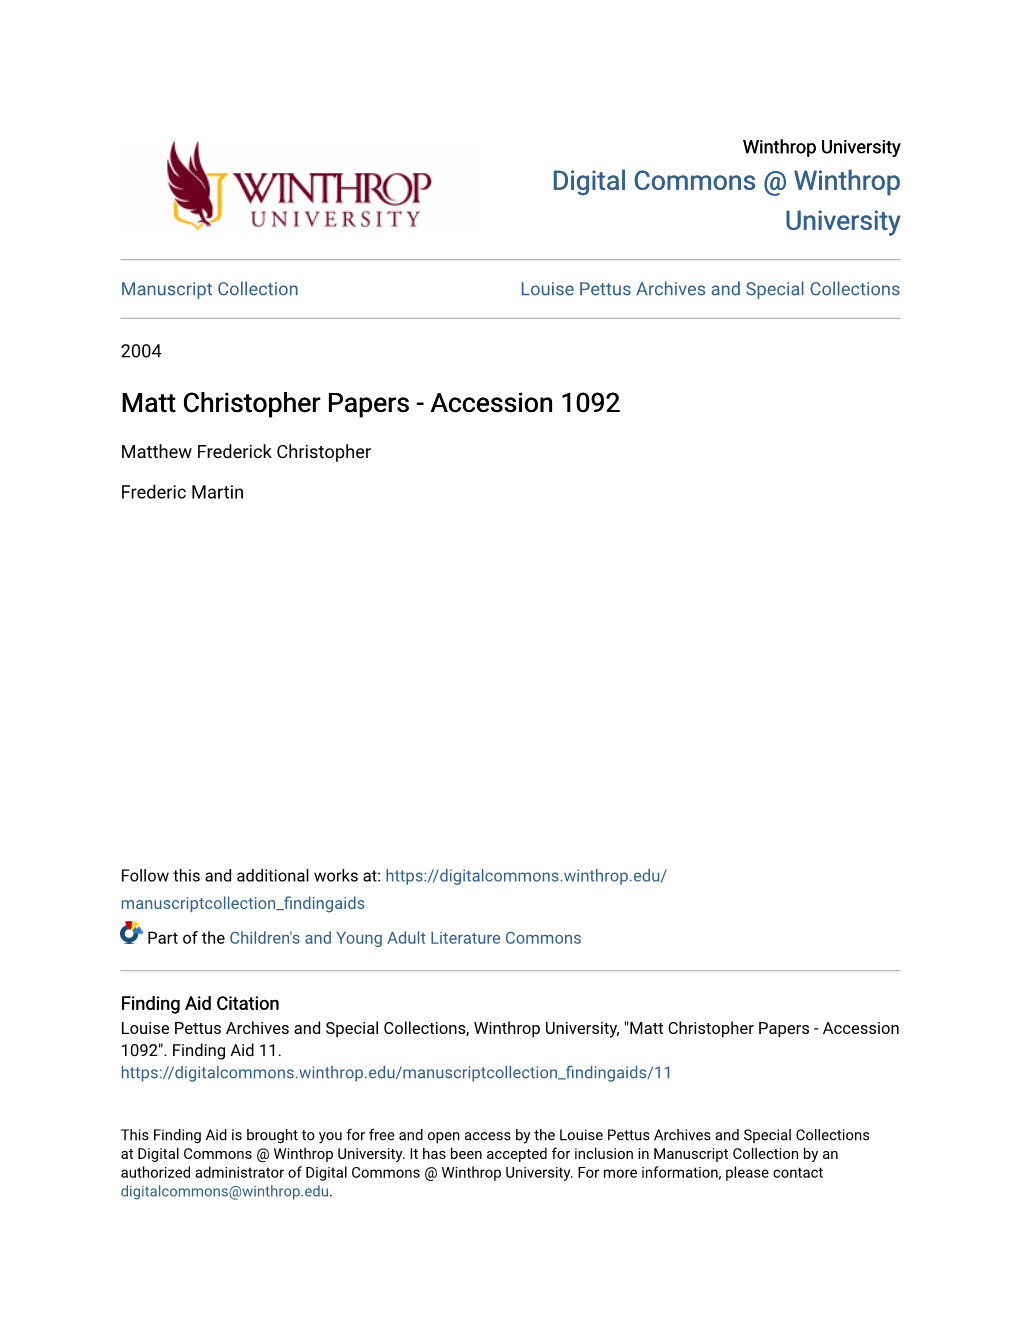 Matt Christopher Papers - Accession 1092